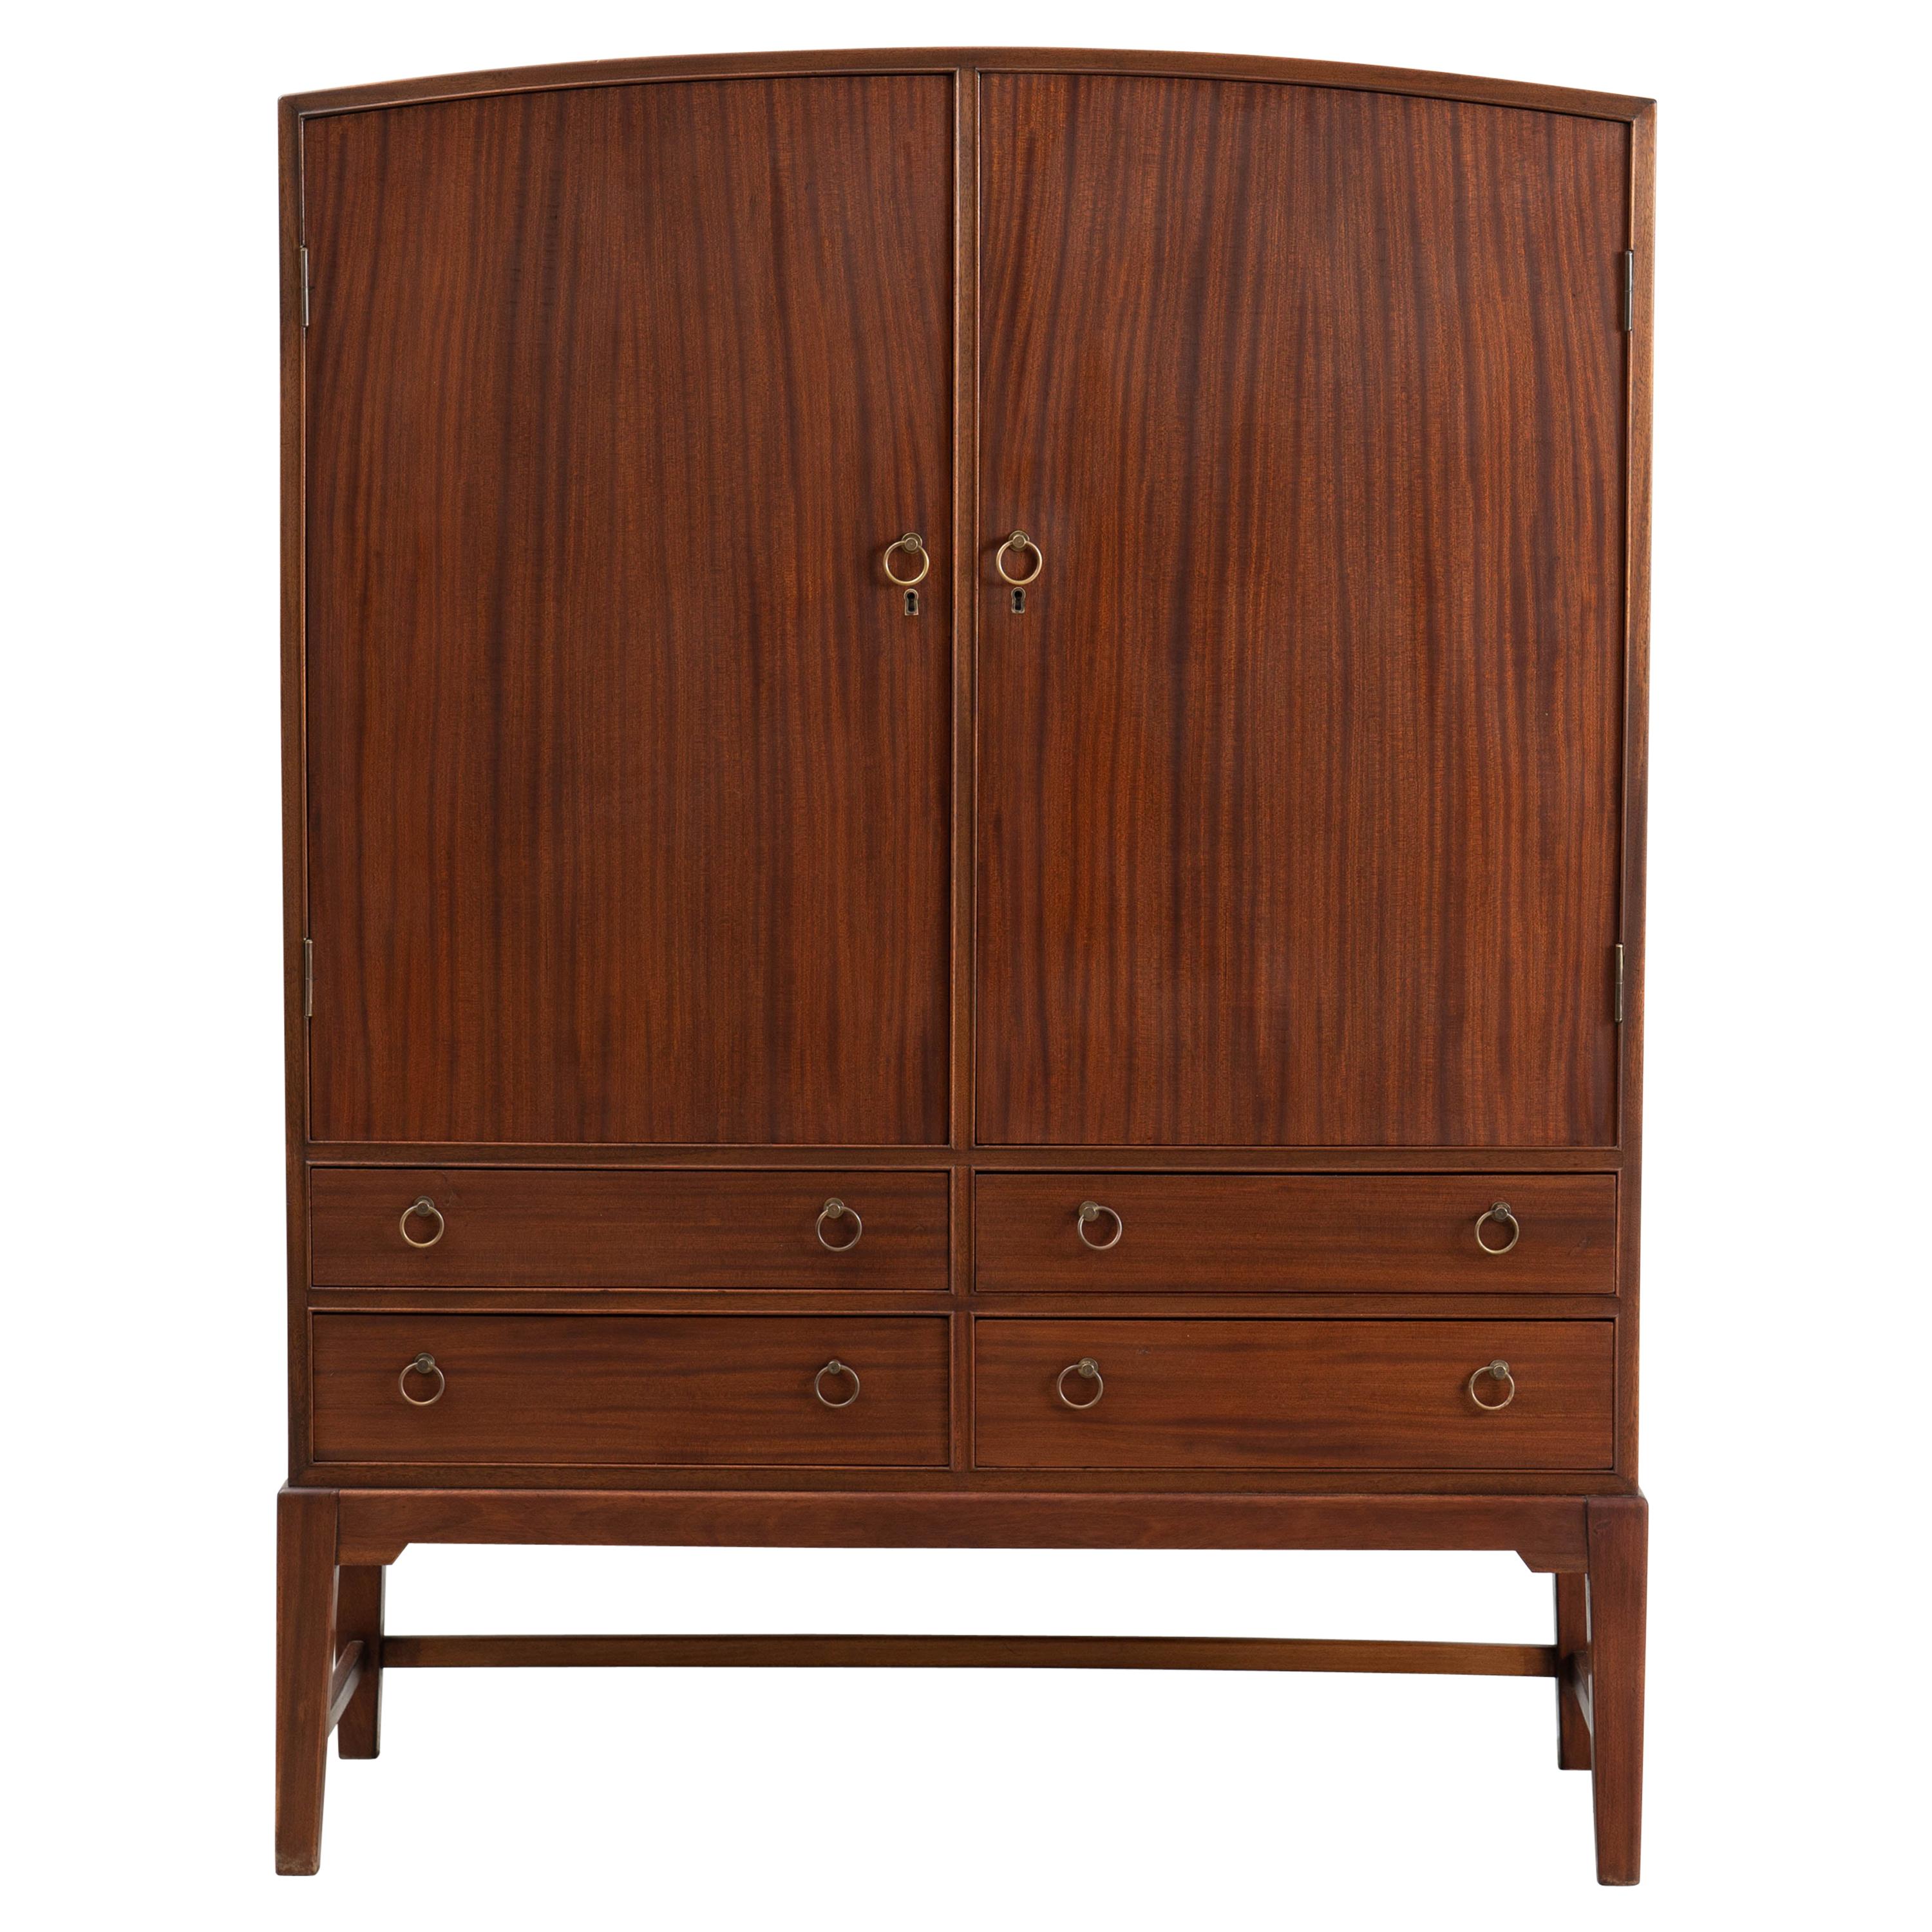 Ole Wanscher, Arched Top Mahogany Cabinet, Denmark